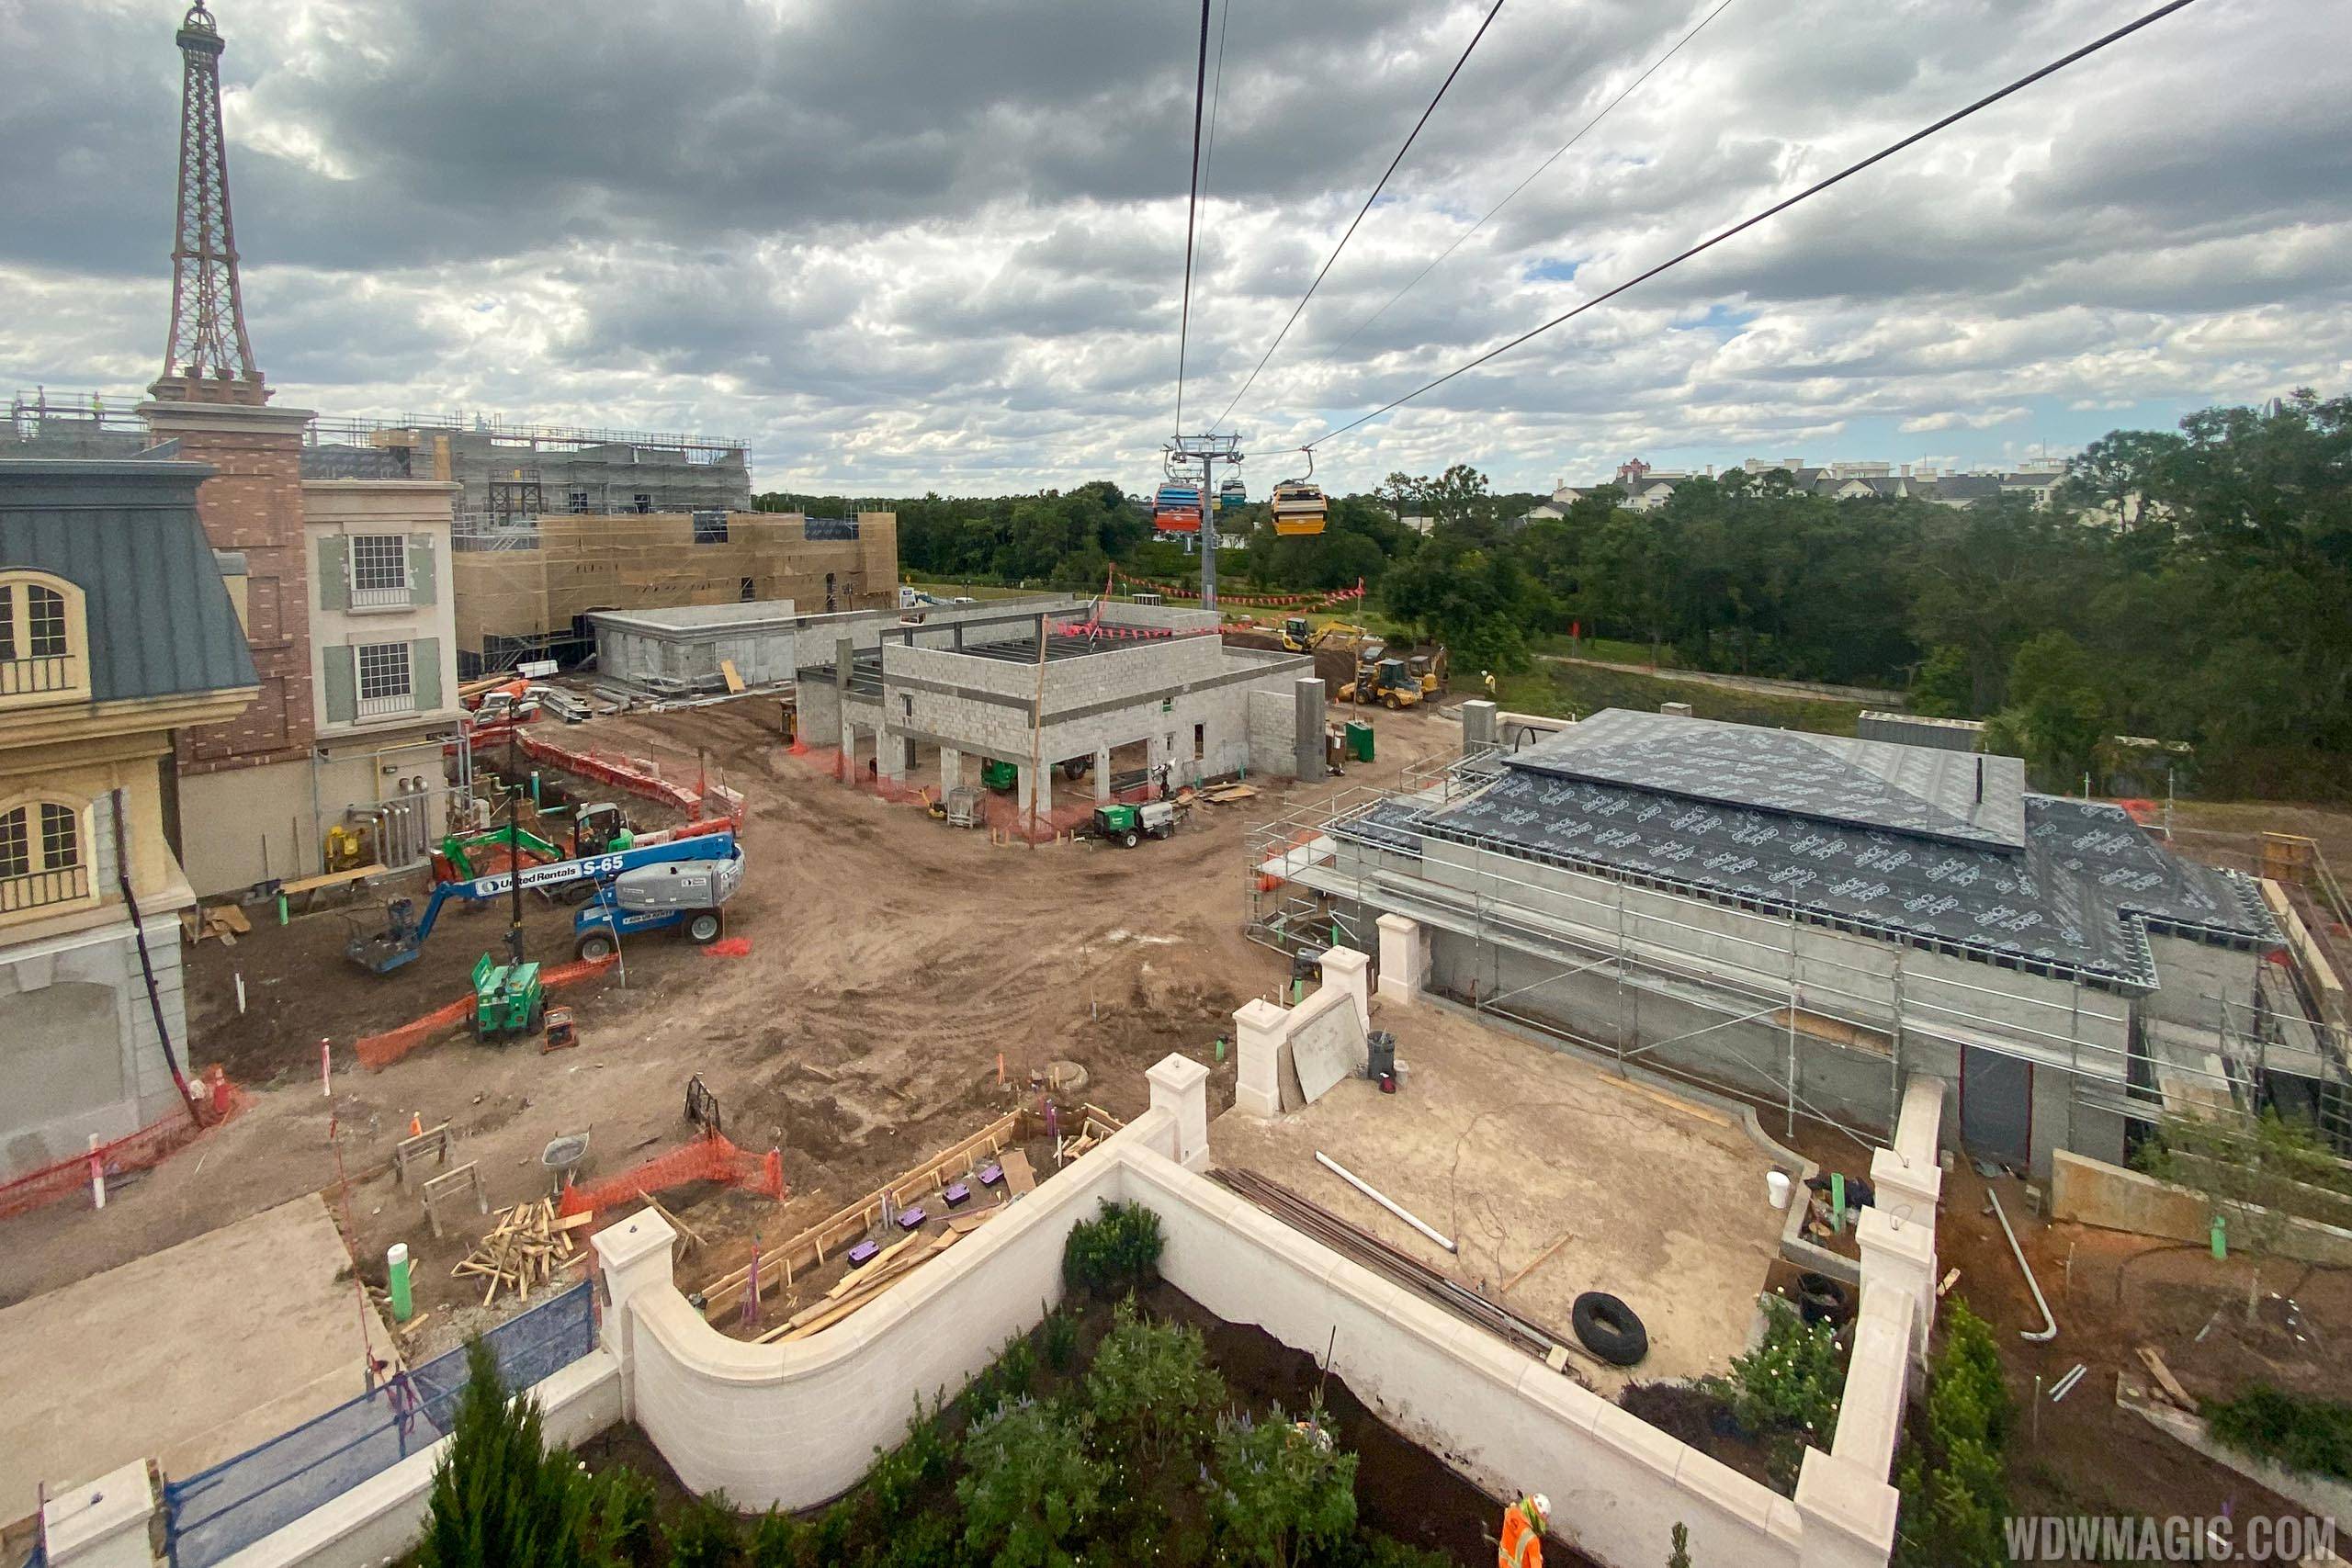 PHOTOS - Latest look at Remy's Ratatouille construction in Epcot's France Pavilion